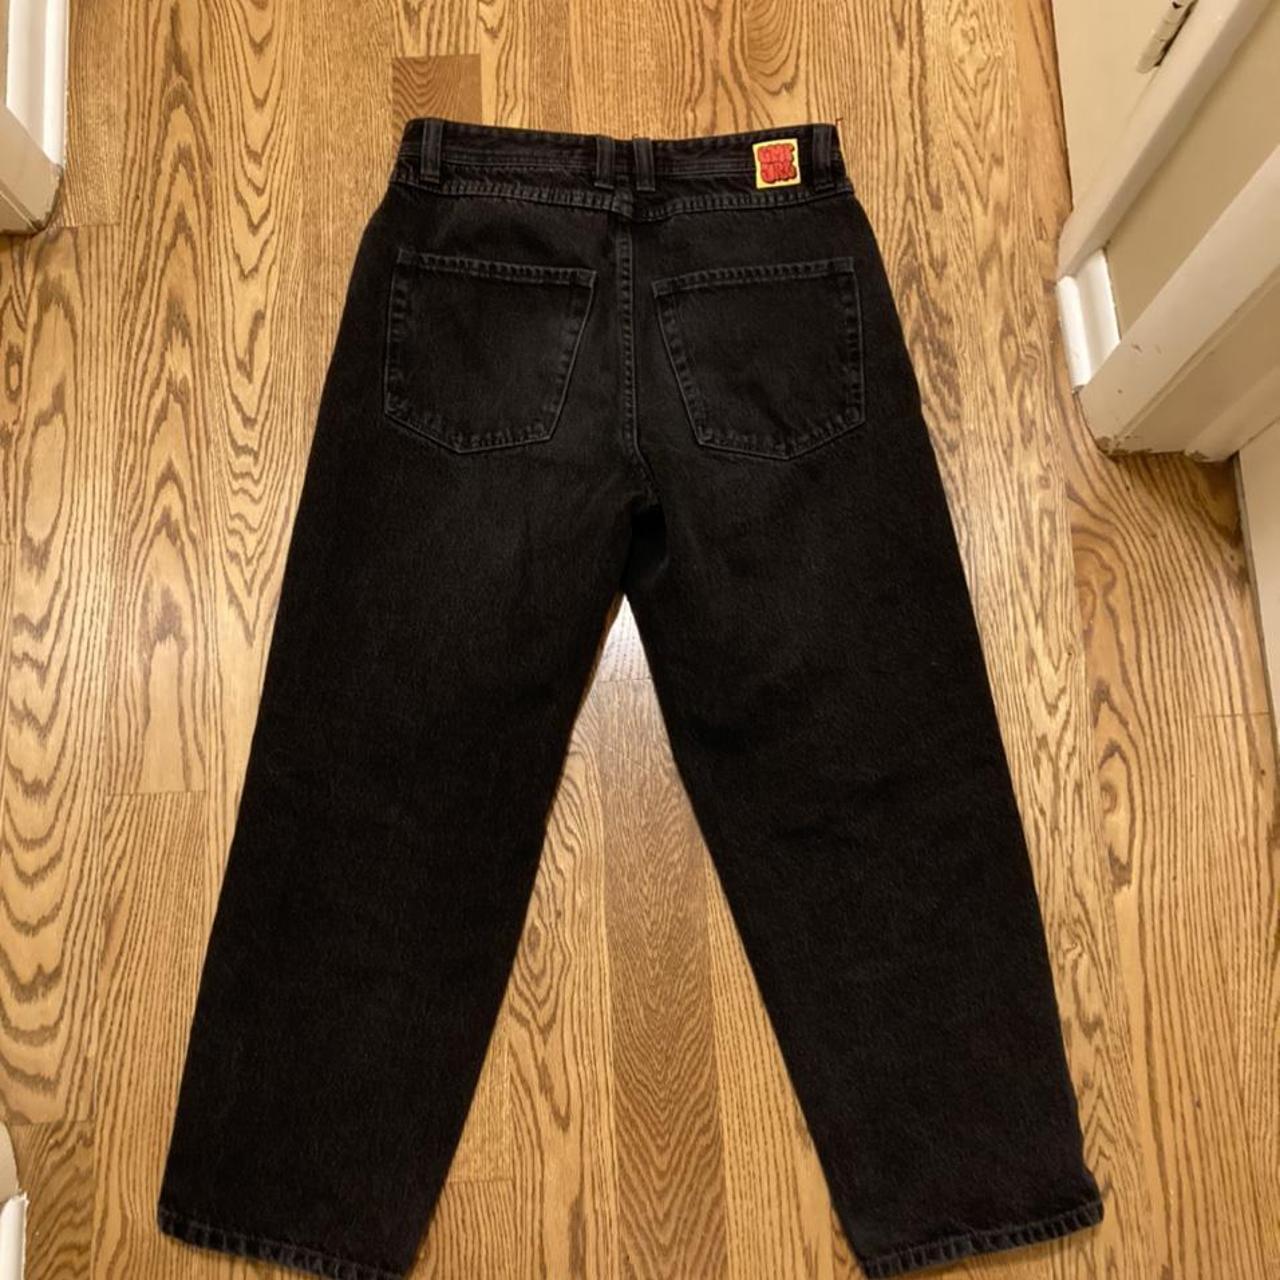 Men's Black and Grey Jeans (2)